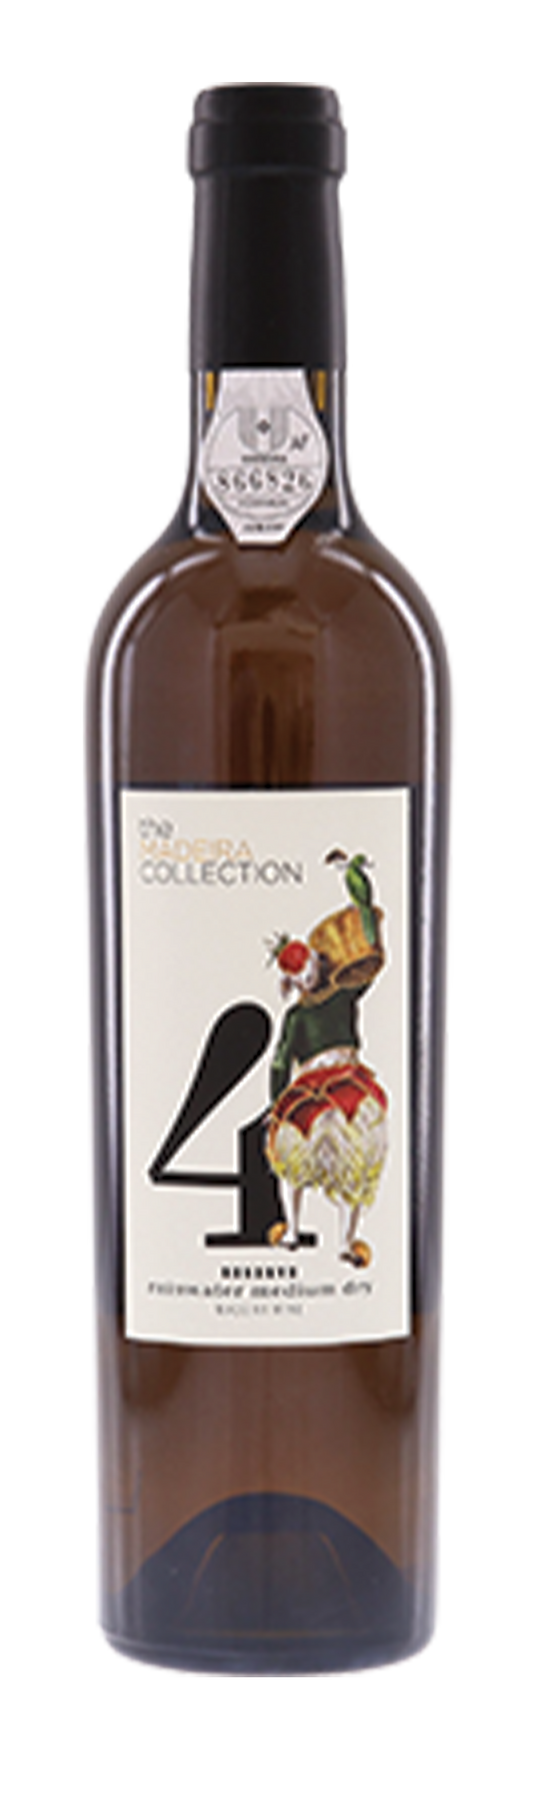 The Madeira Collection #4 20% 50cl